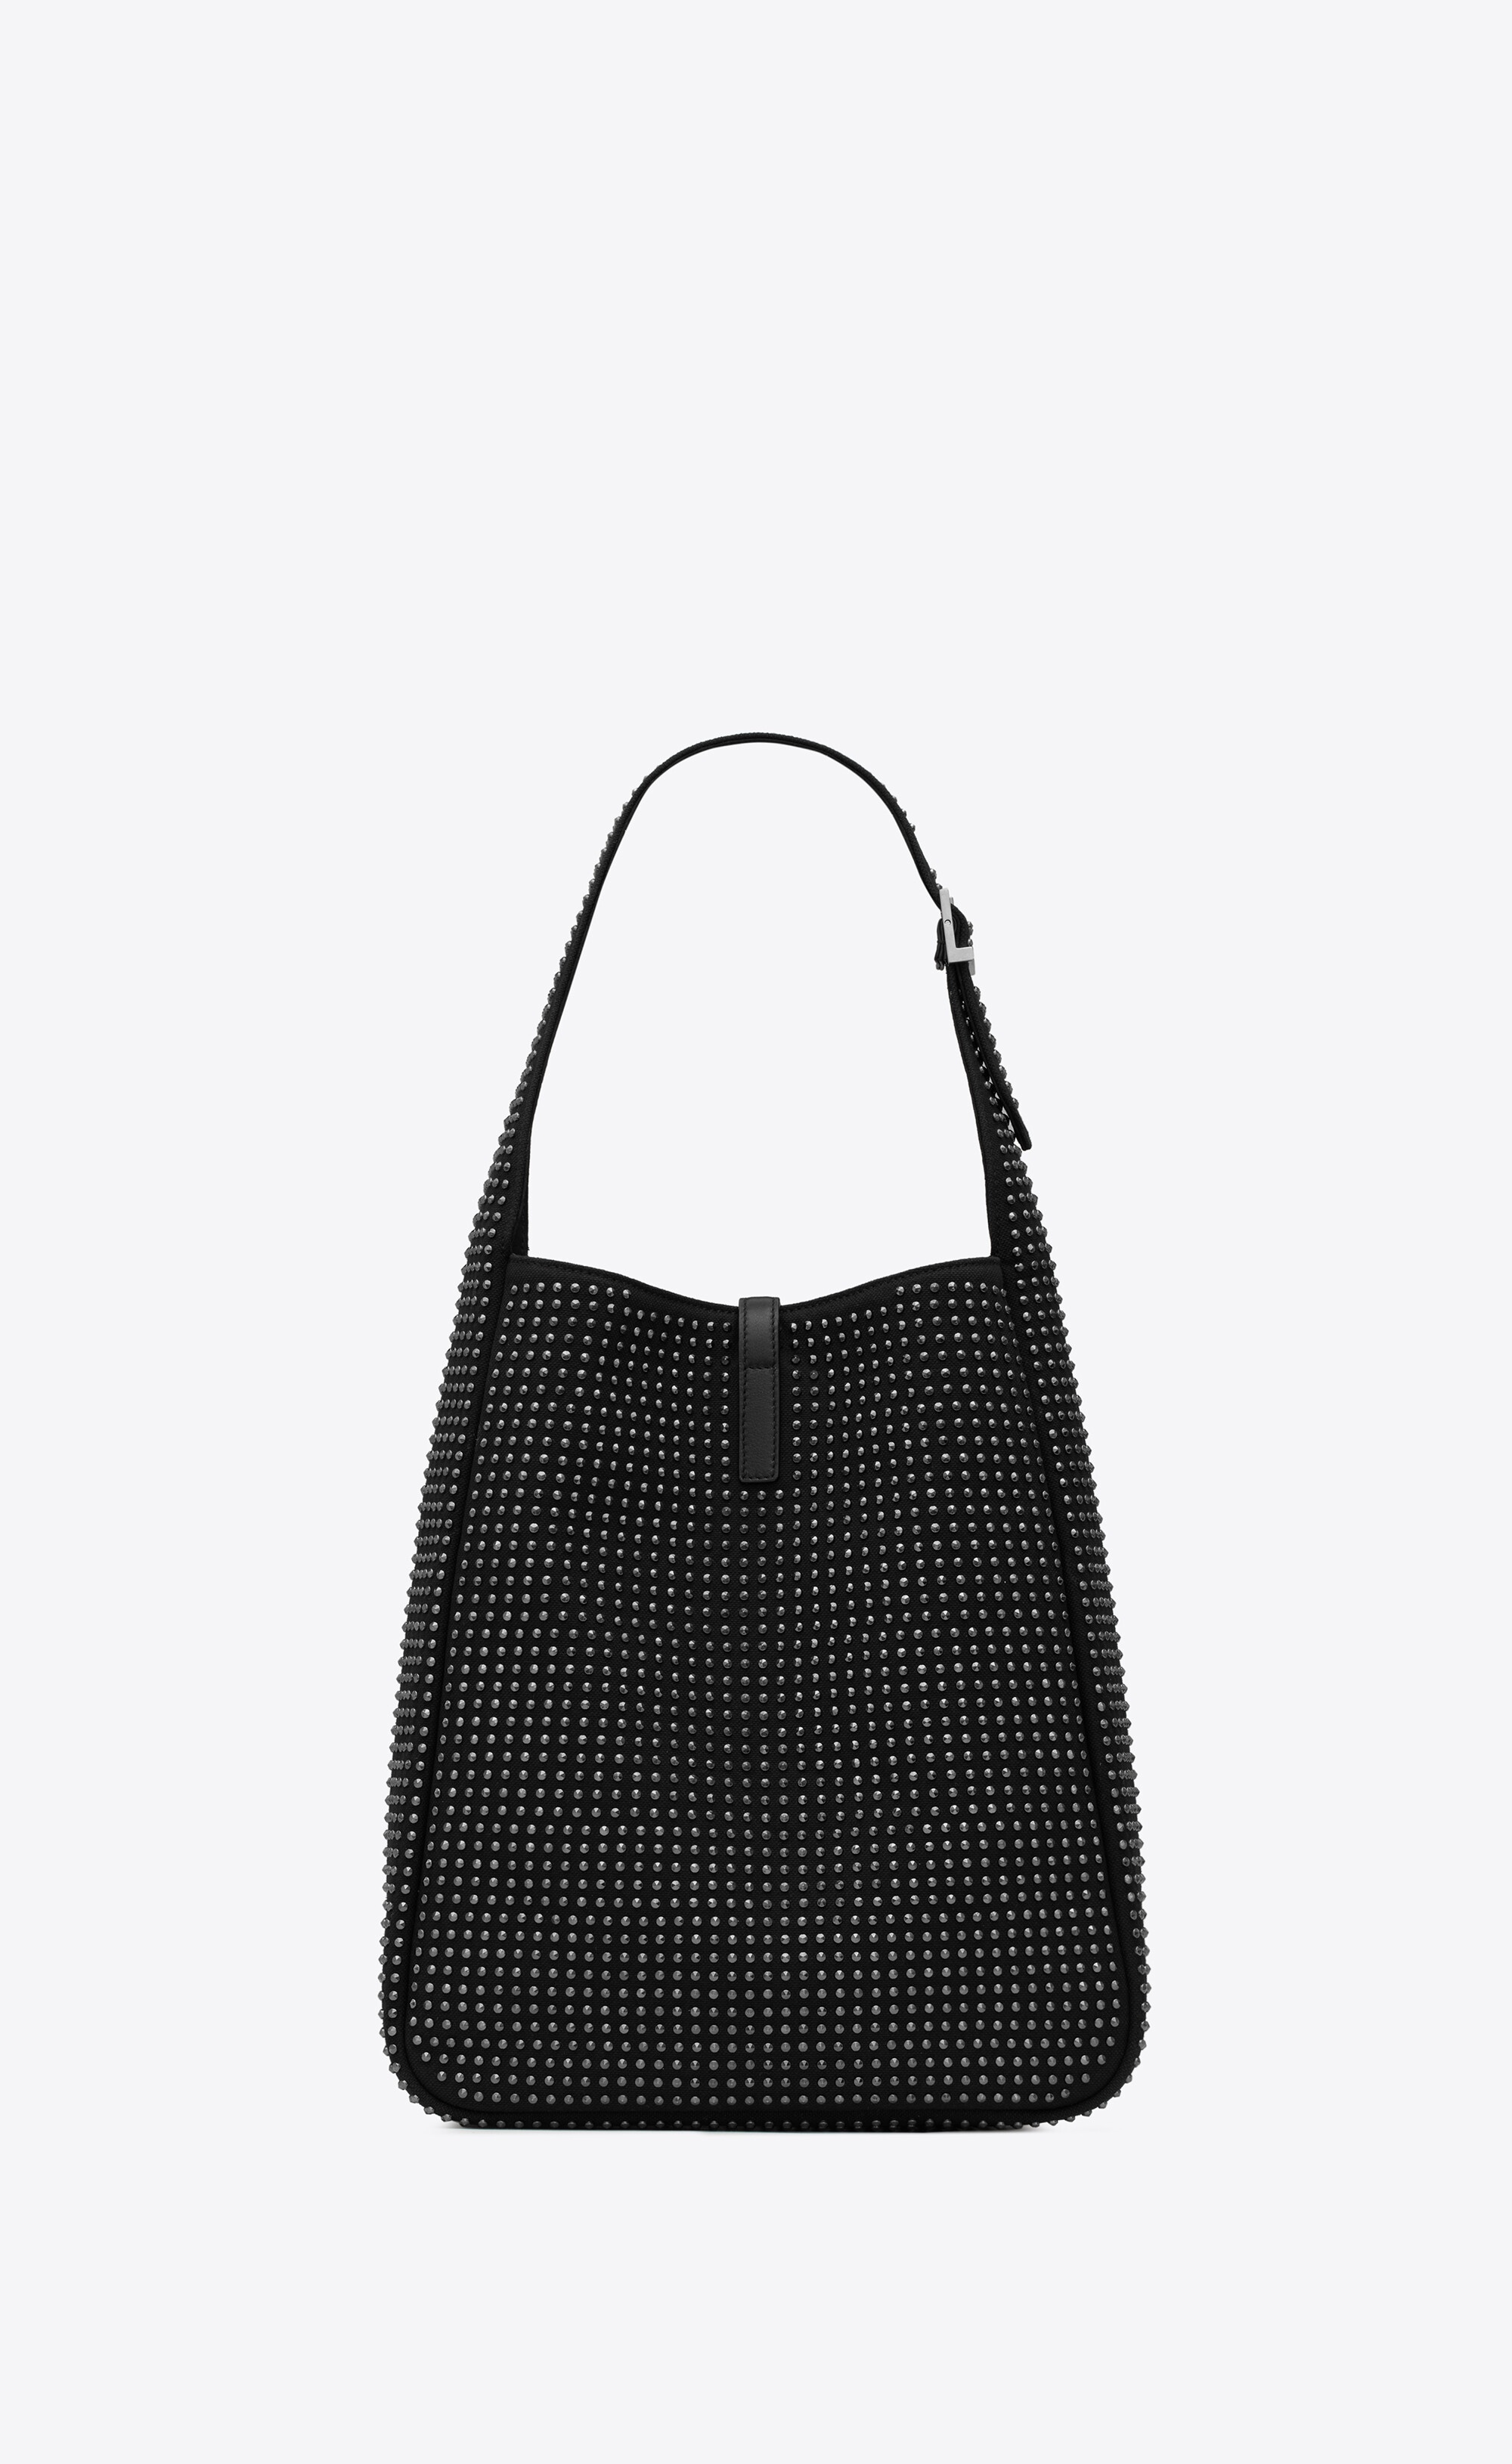 le 5 à 7 soft medium hobo bag in canvas, leather and studs - 2